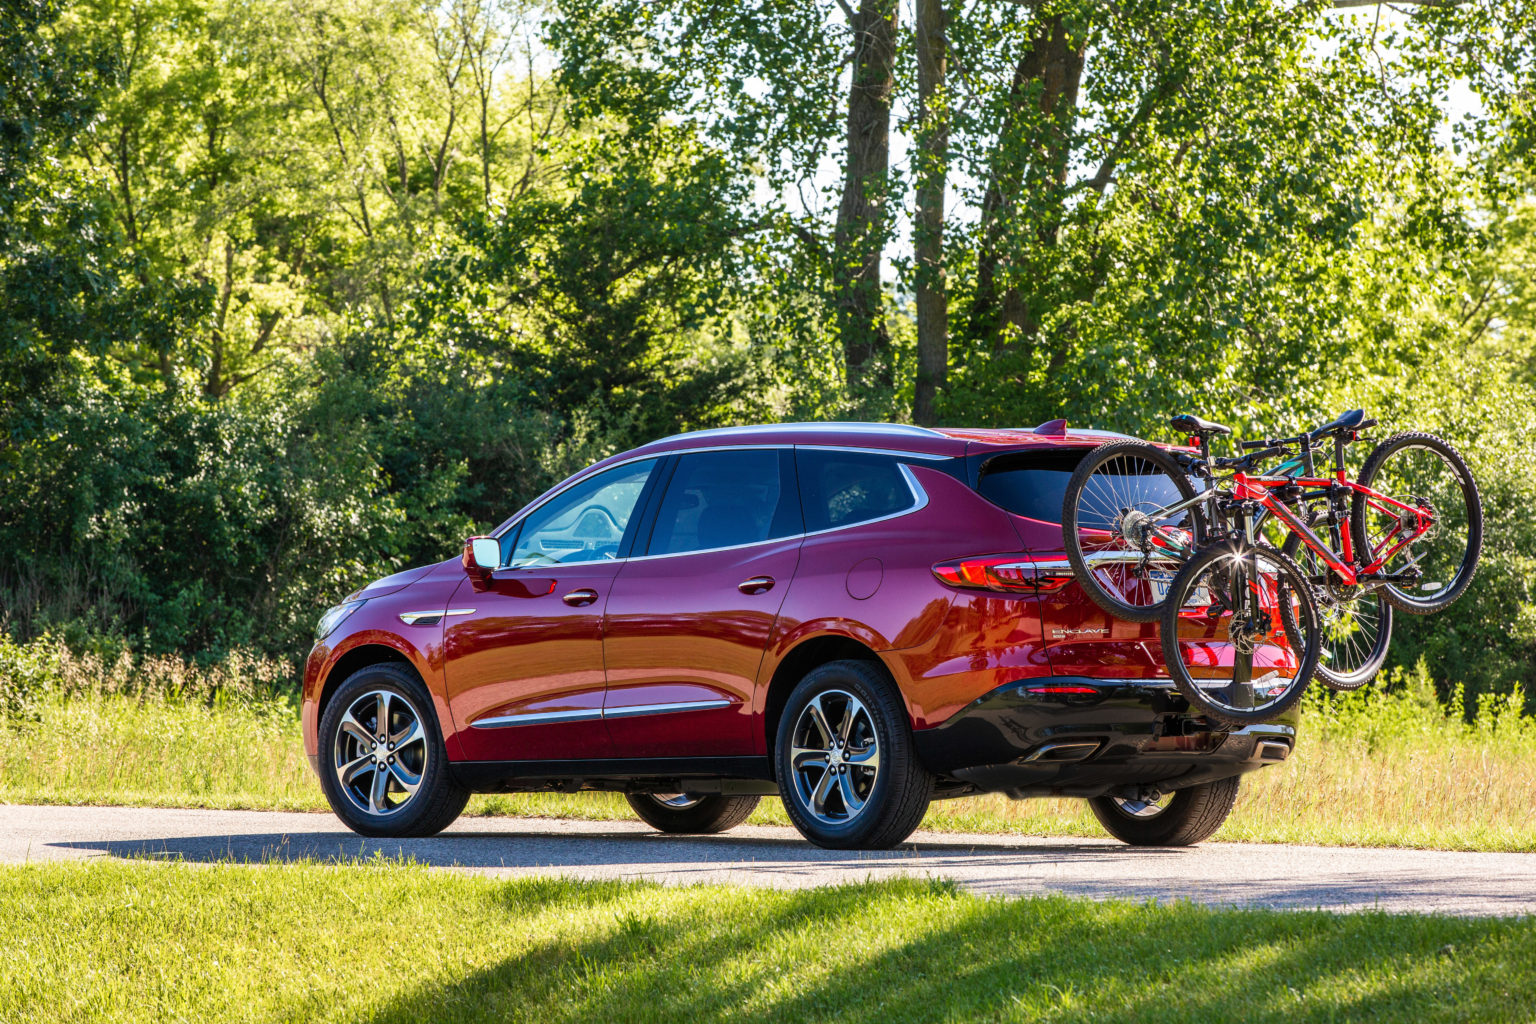 Buick is adding new trim levels and one new SUV to its lineup for the 2020 model year.